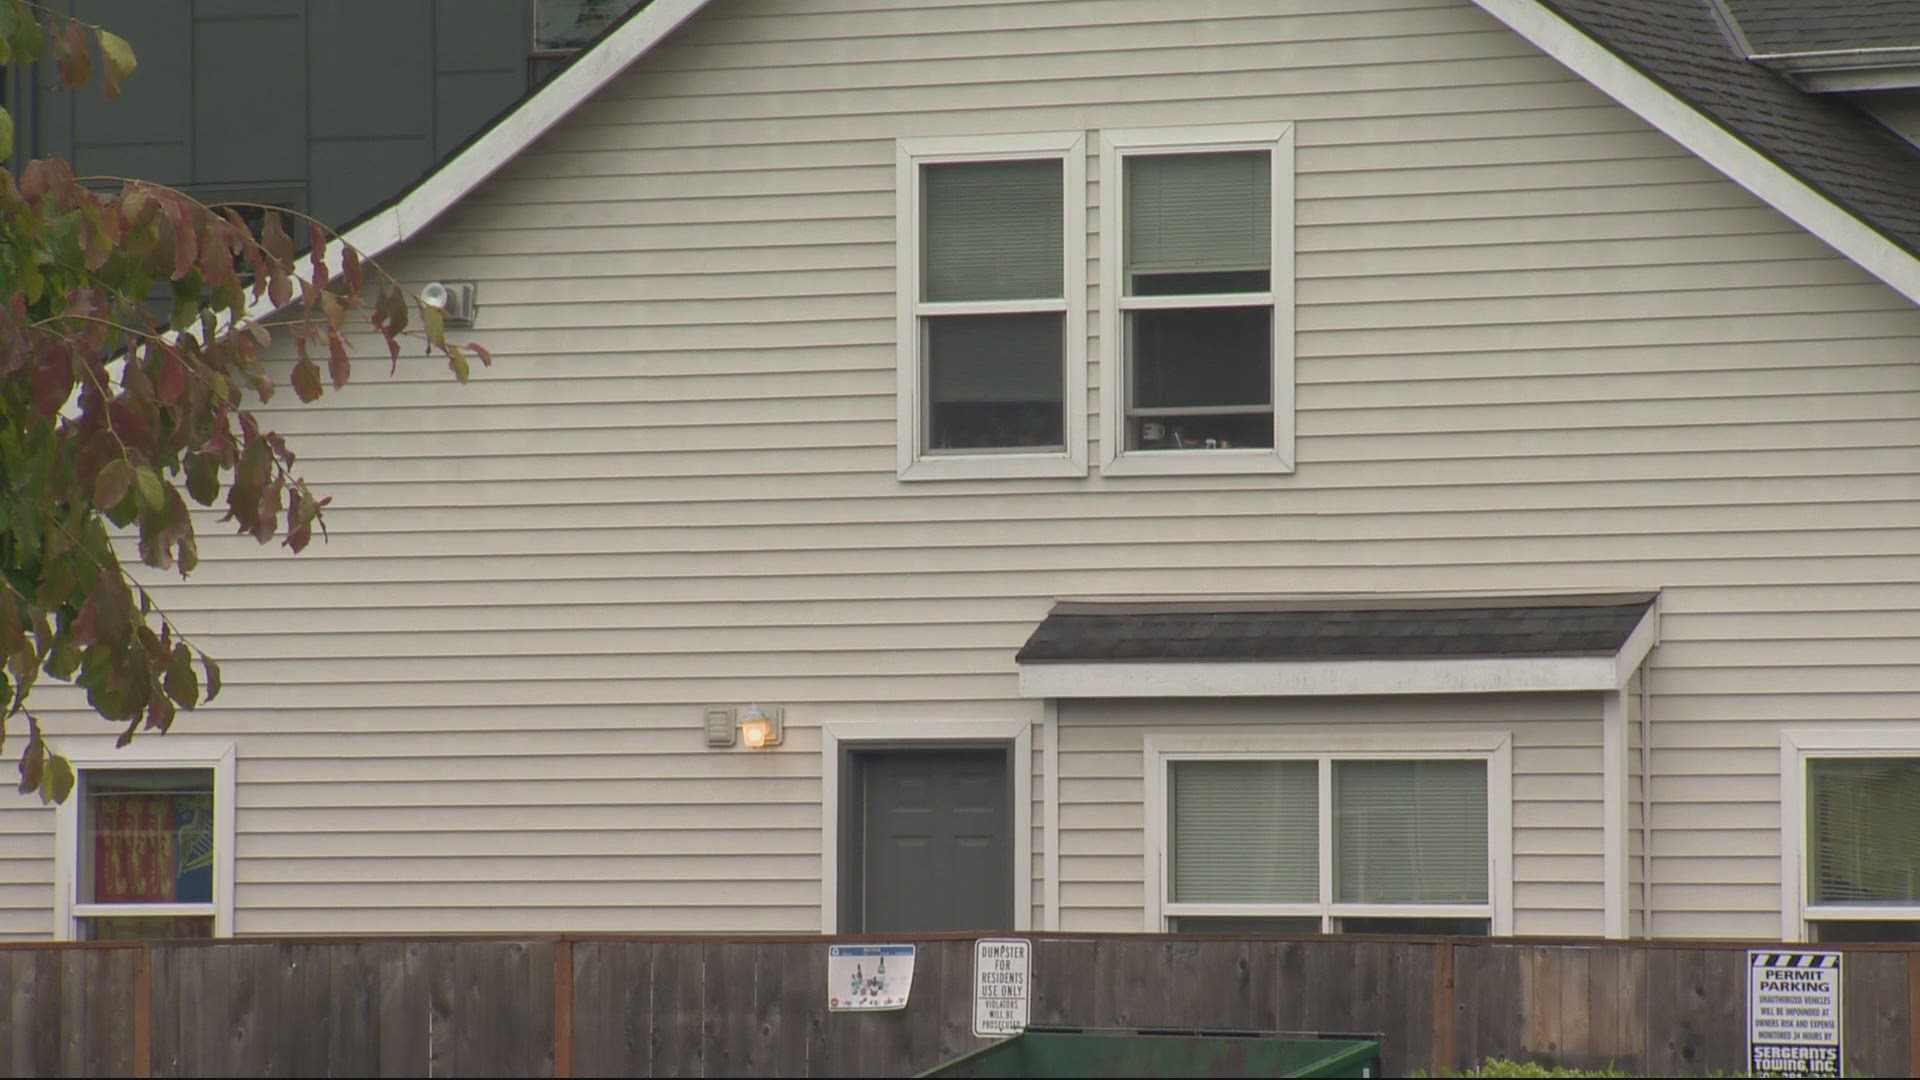 A Portland woman dodged a real estate wire transfer scam that nearly cost her $200,000. It's the same kind of scam impacting thousands of people every year.